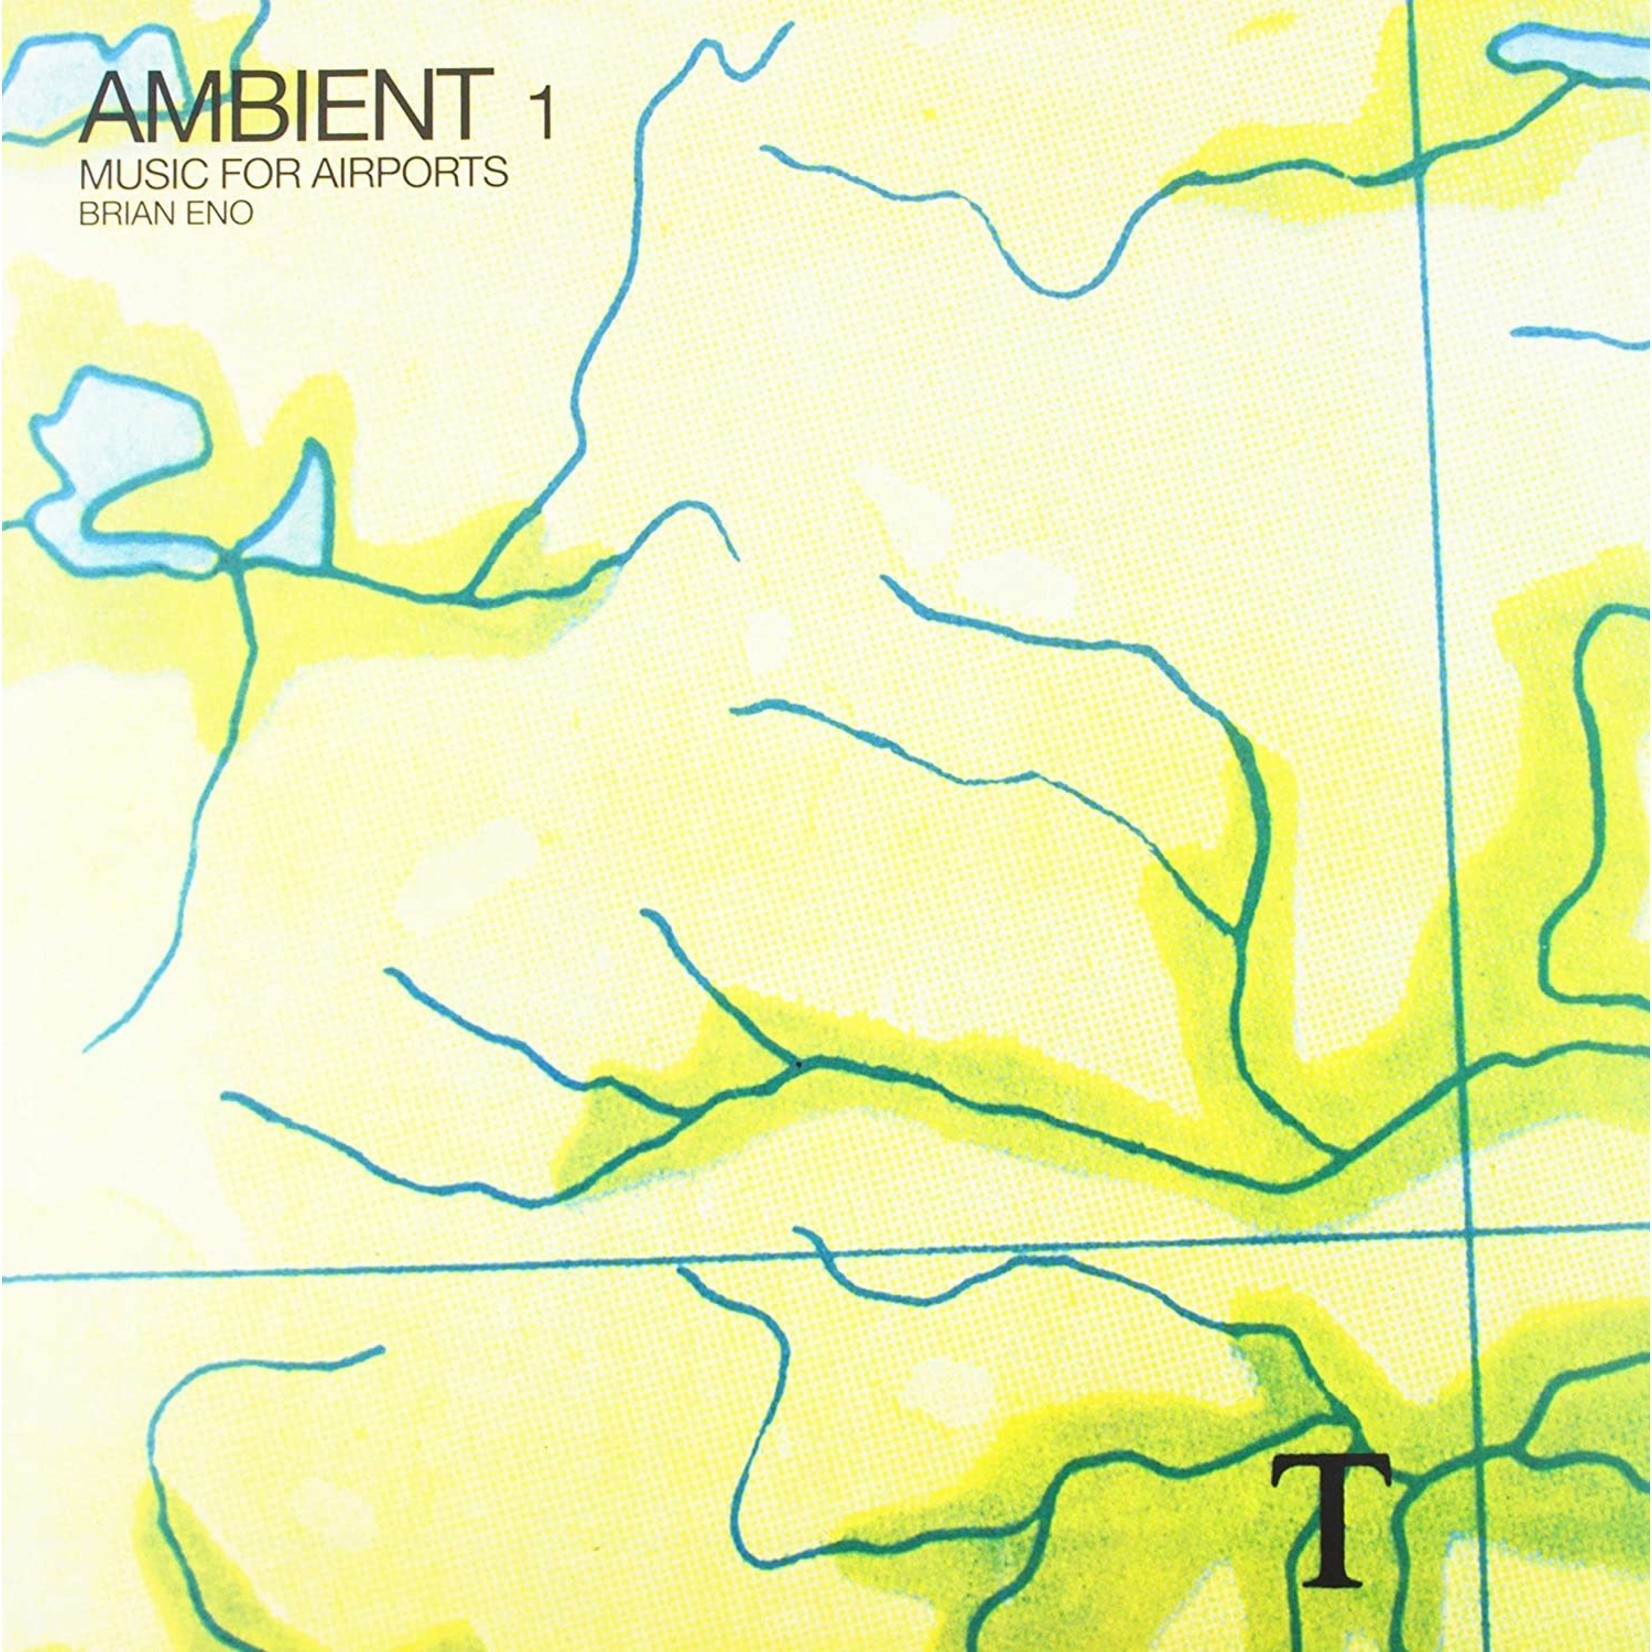 [New] Brian Eno - Ambient 1: Music For Airports